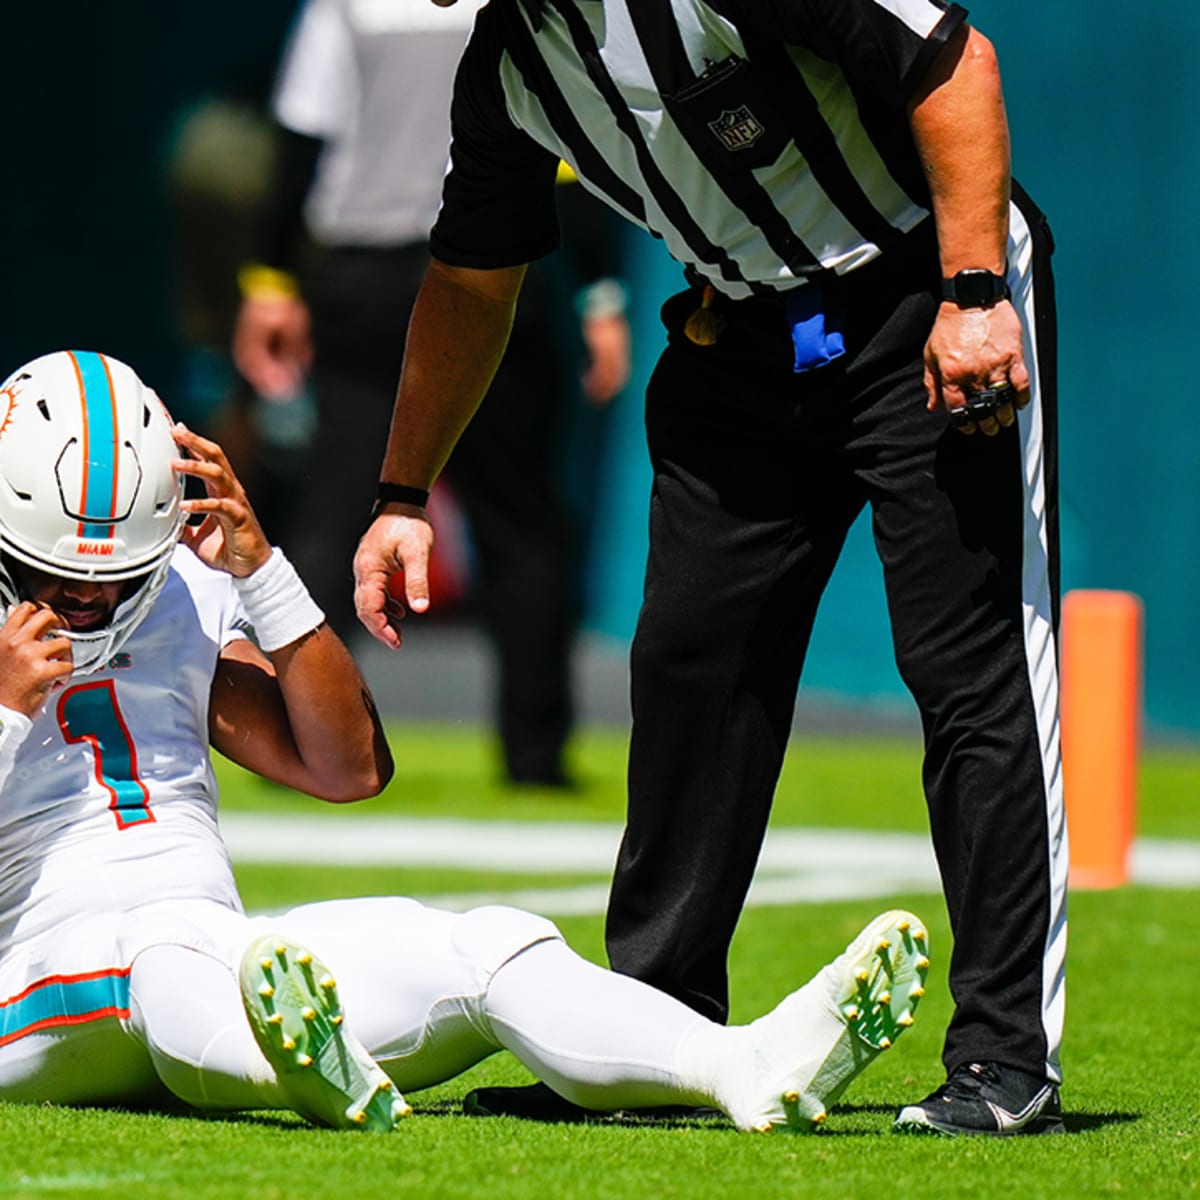 Pittsburgh Steelers 10-16 Miami Dolphins: Tua Tagovailoa leads Dolphins to  NFL victory on concussion return, NFL News